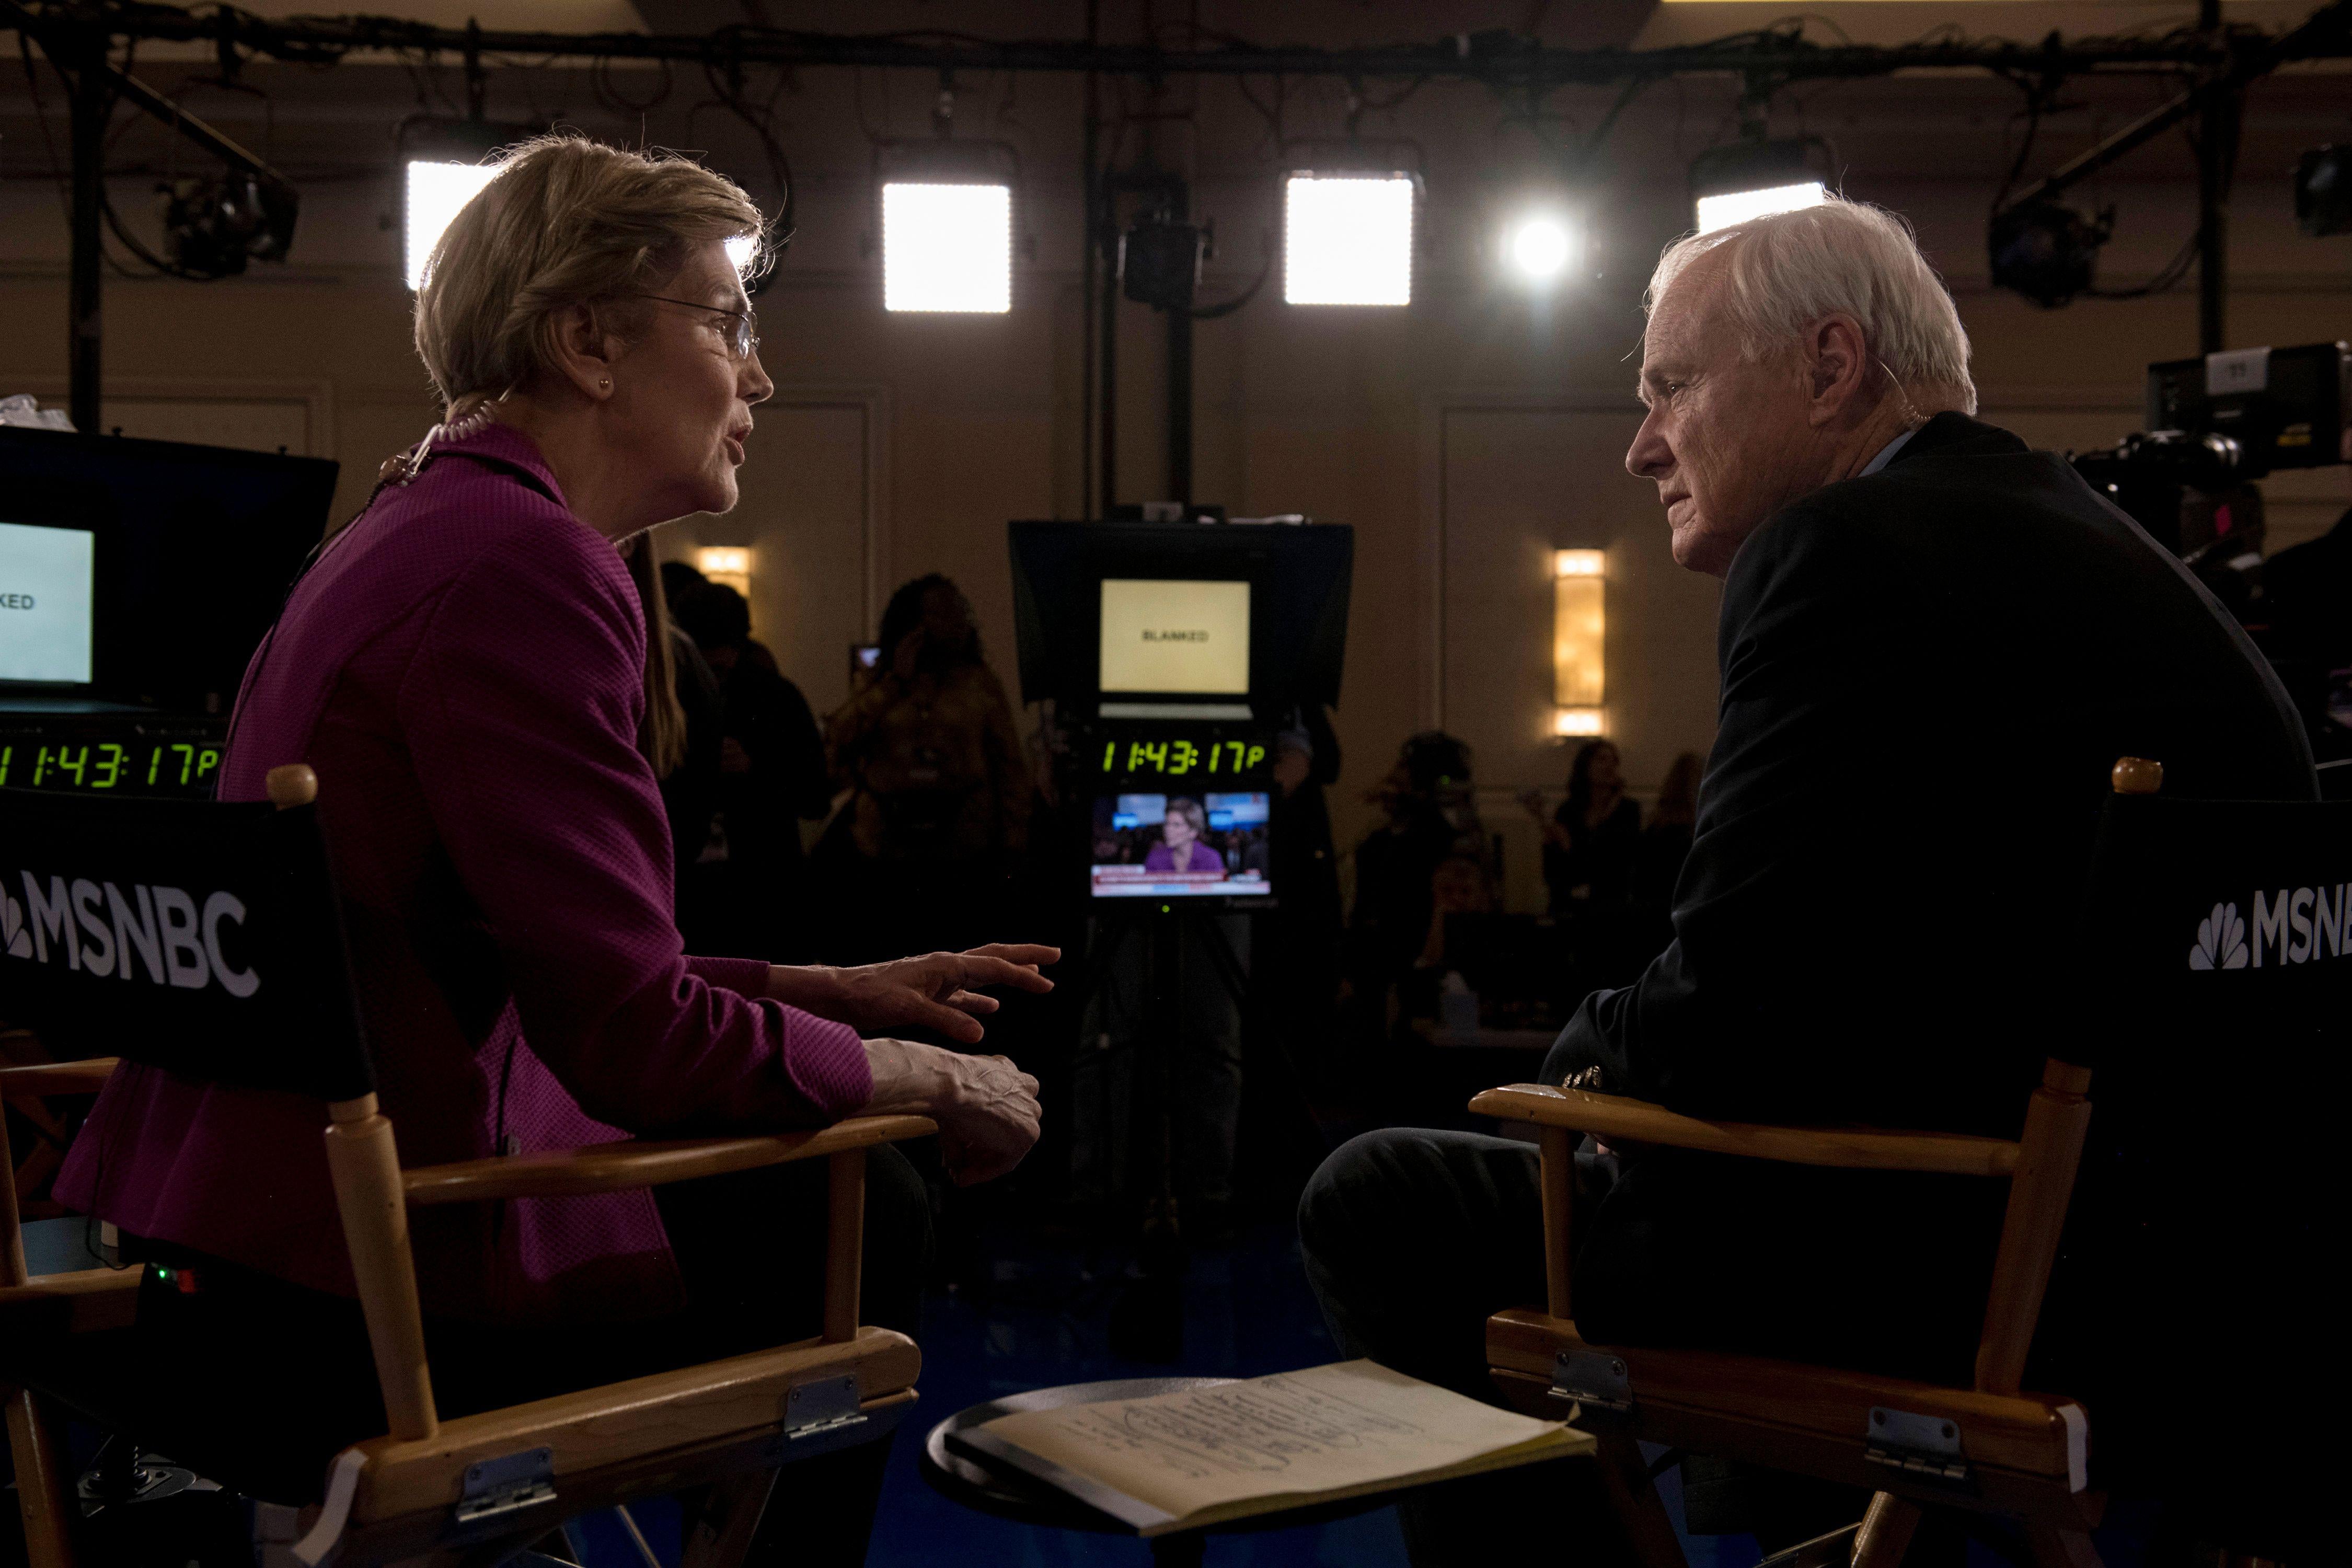 Elizabeth Warren and Chris Matthews speak together in the spin room after the South Carolina debate, sitting in folding chairs, cameras visible.